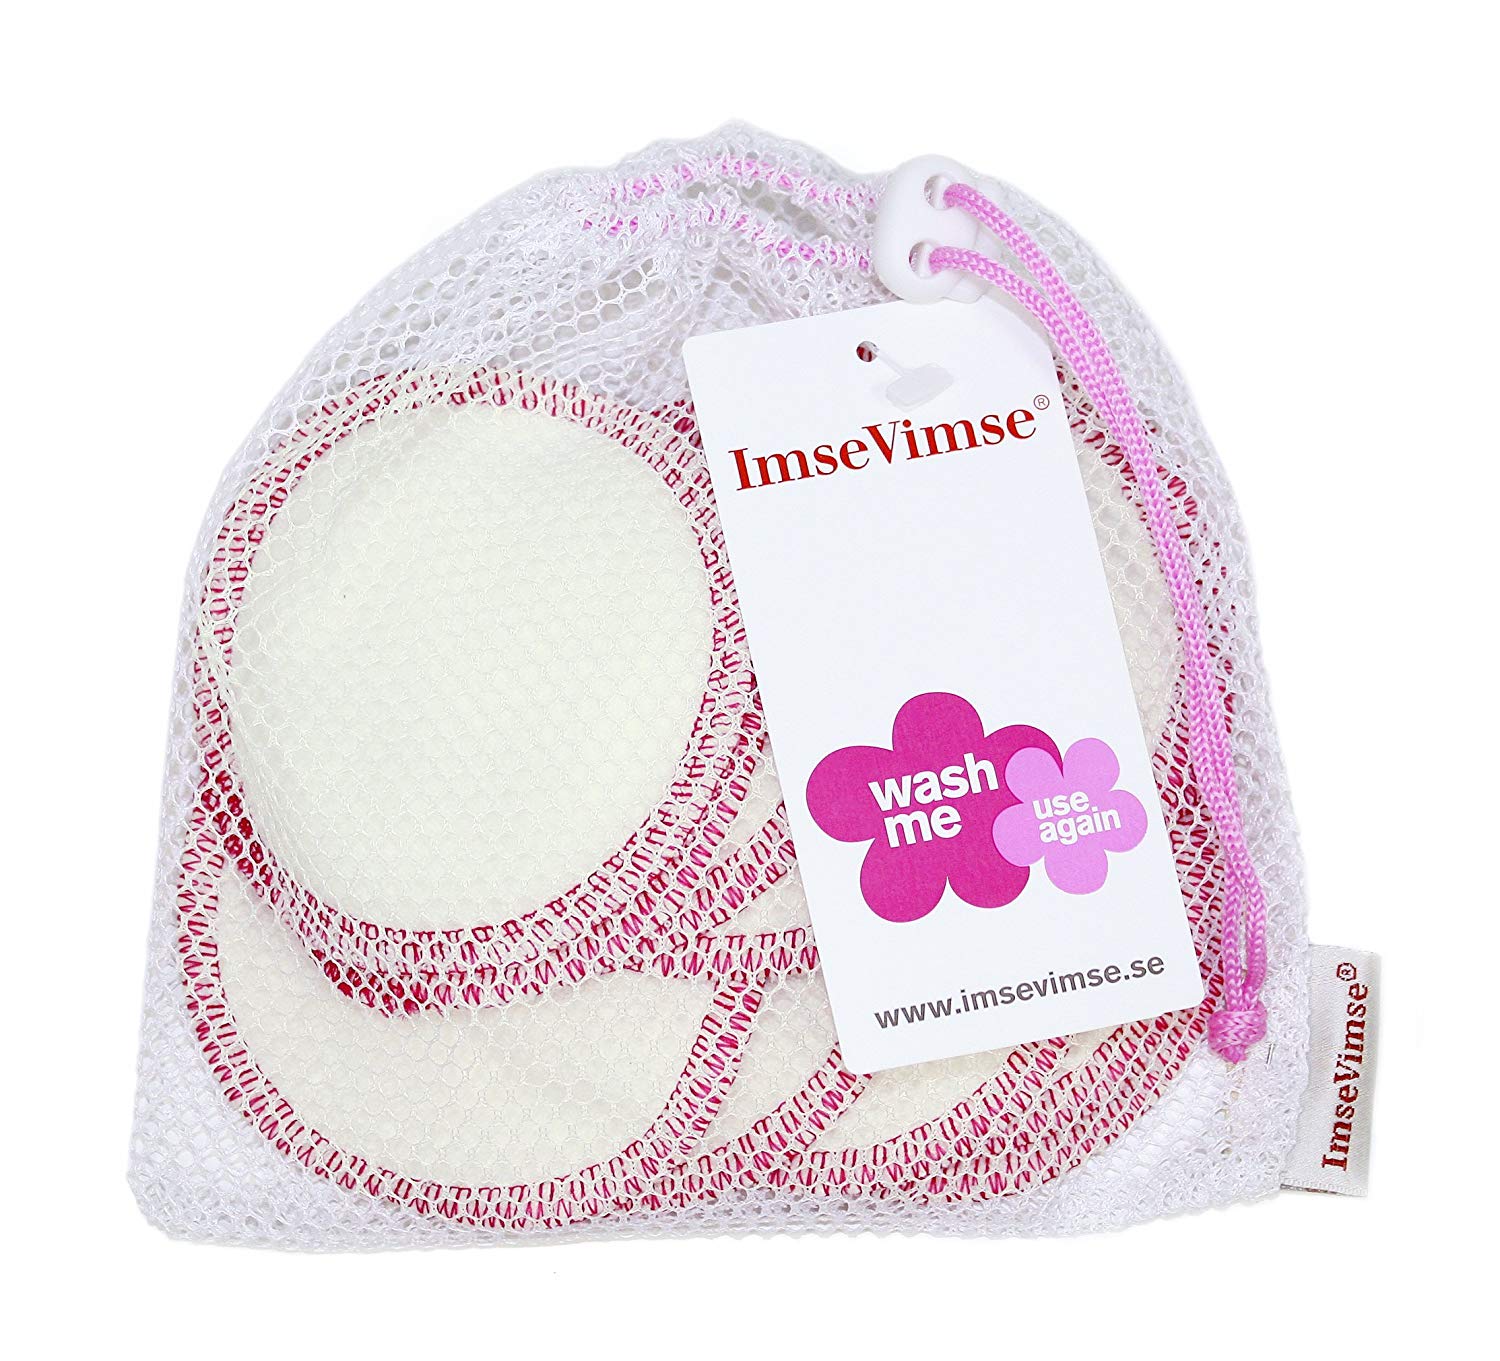 ImseVimse Washable Make-up Remover Pads - Pack of 10